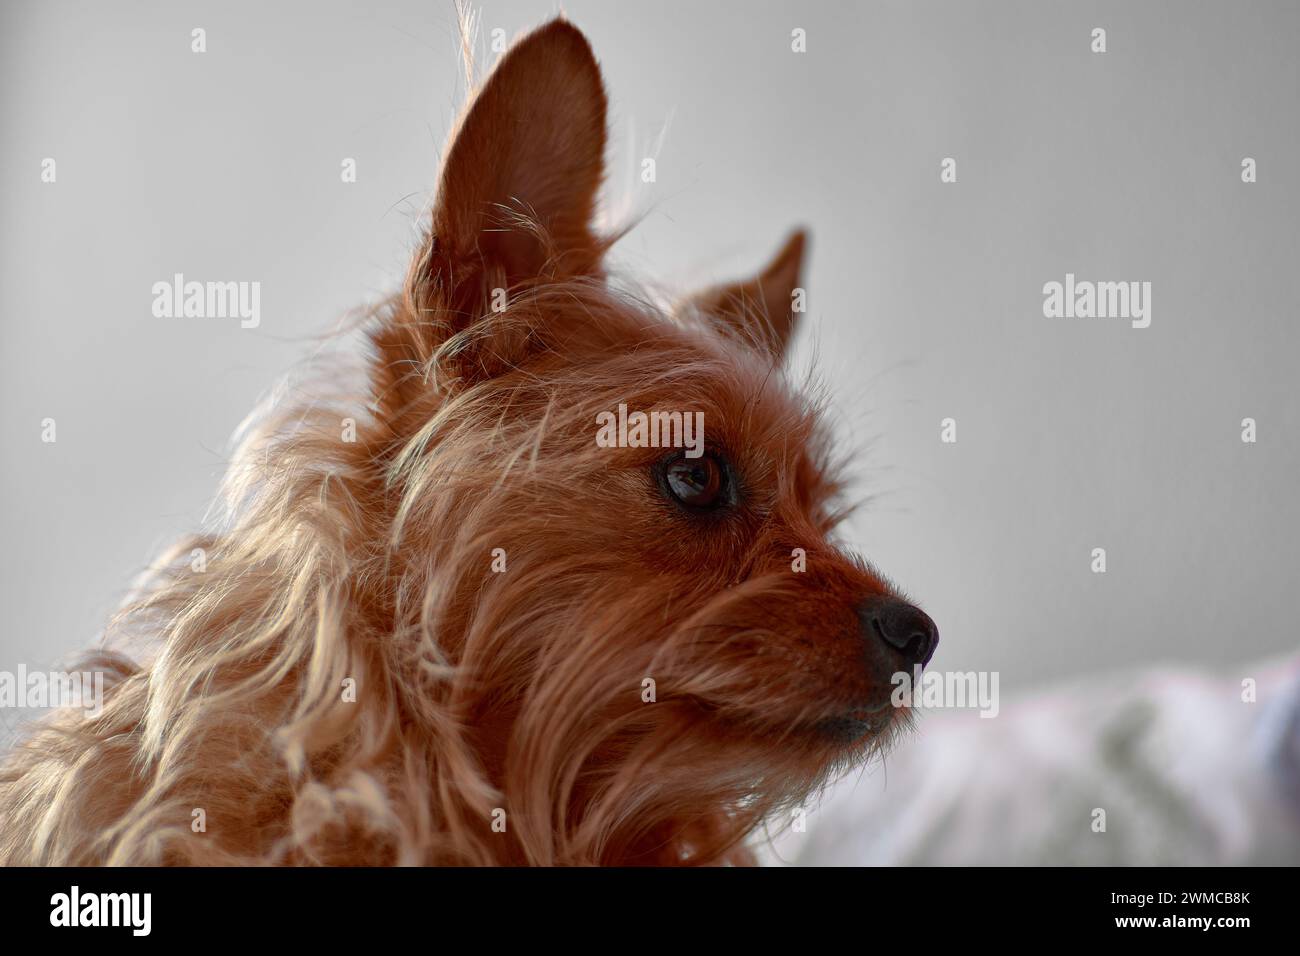 A small funny furry dog of the Yorkshire terrier breed with big ears and long red shaggy hair, staring Stock Photo